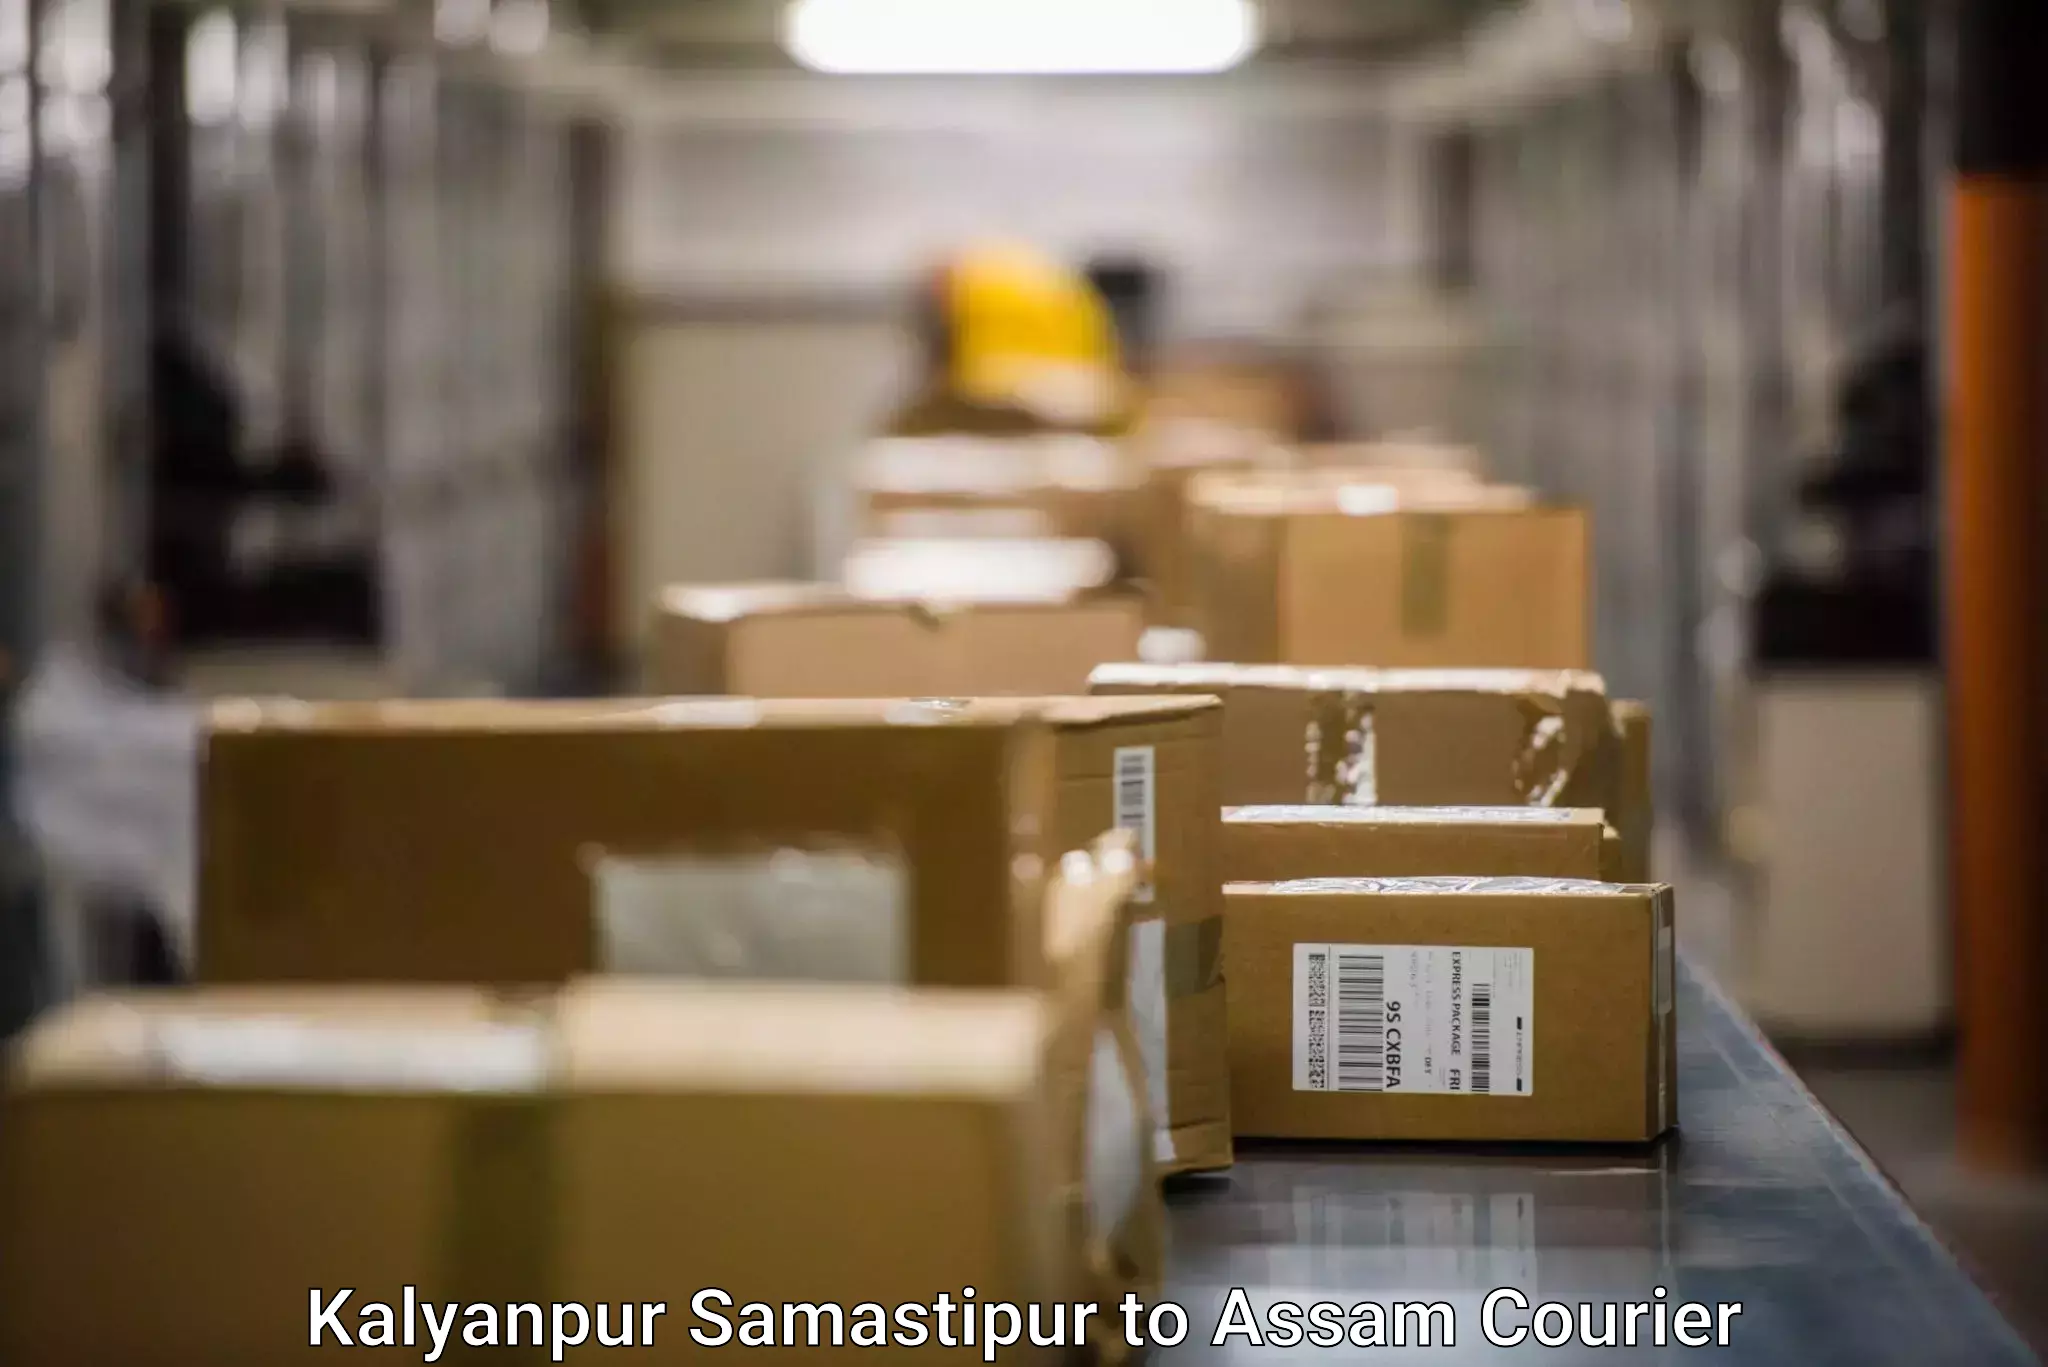 Budget-friendly shipping in Kalyanpur Samastipur to Udharbond